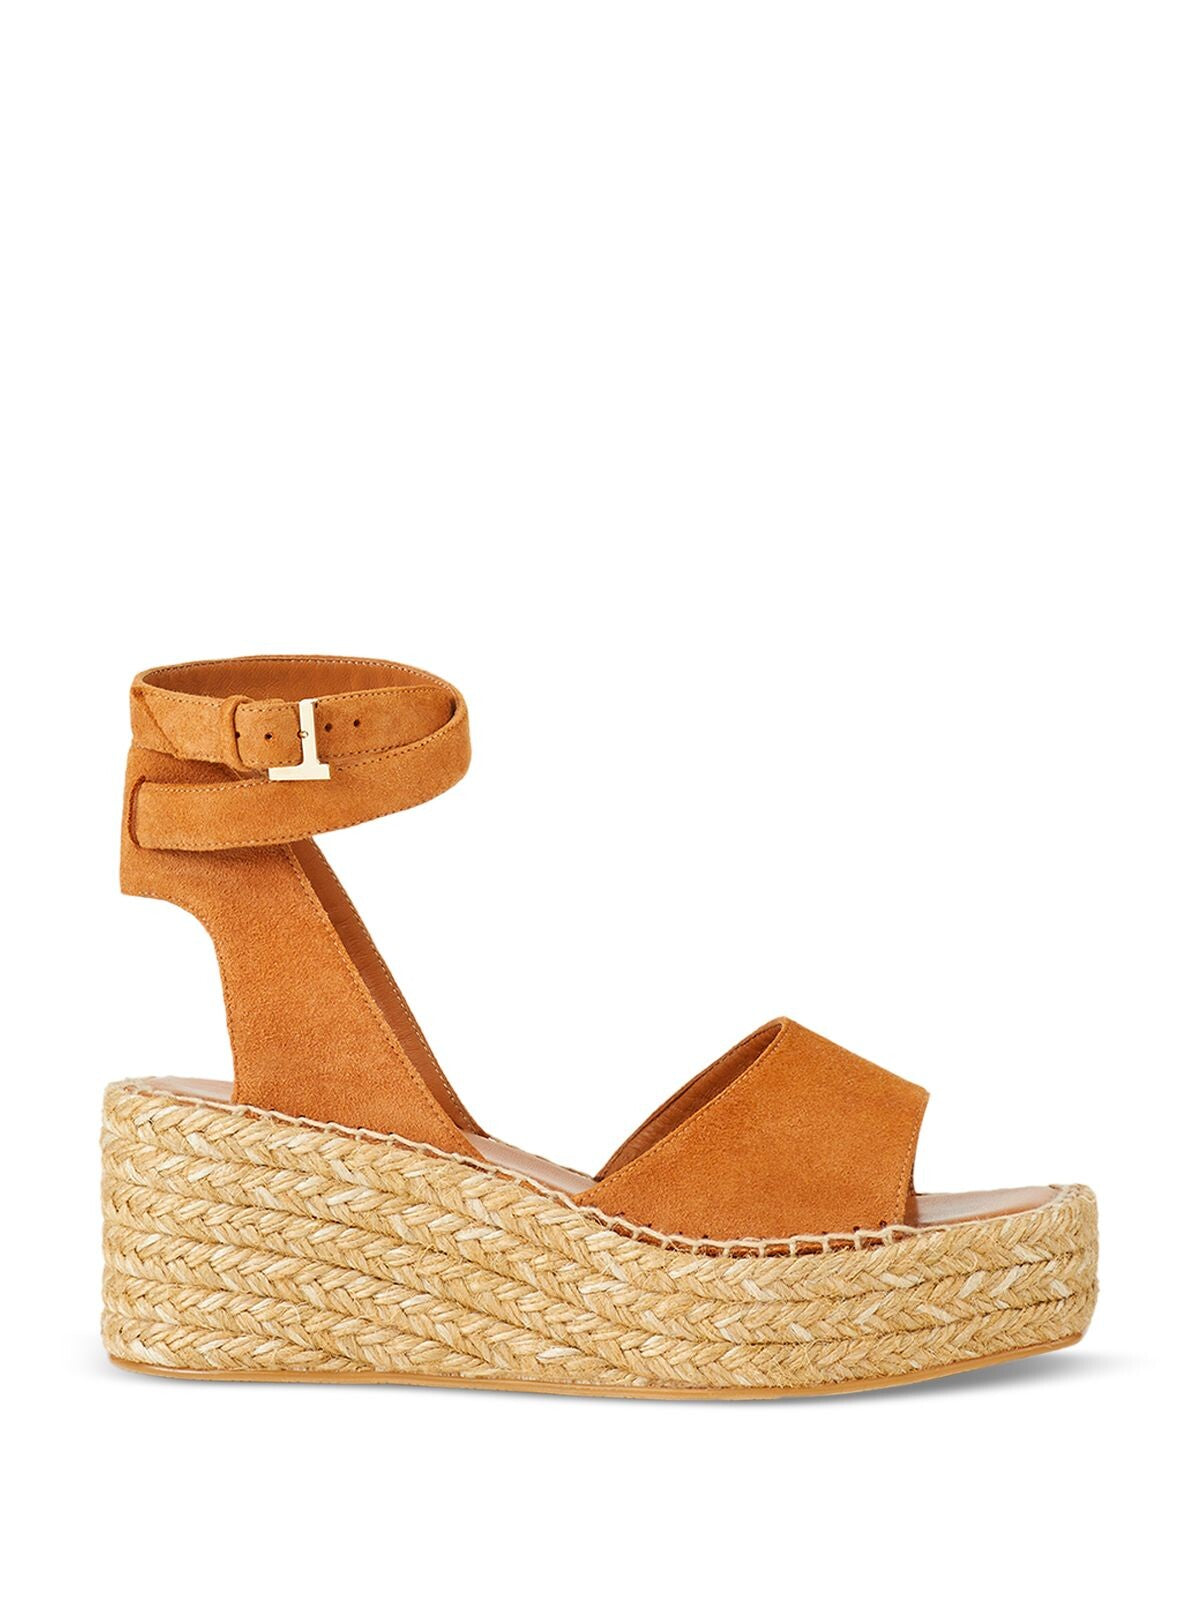 LAFAYETTE 148 NEW YORK Womens Brown Padded Platform 1-1/2" Woven Ankle Strap Margot Square Toe Wedge Buckle Leather Espadrille Shoes 39